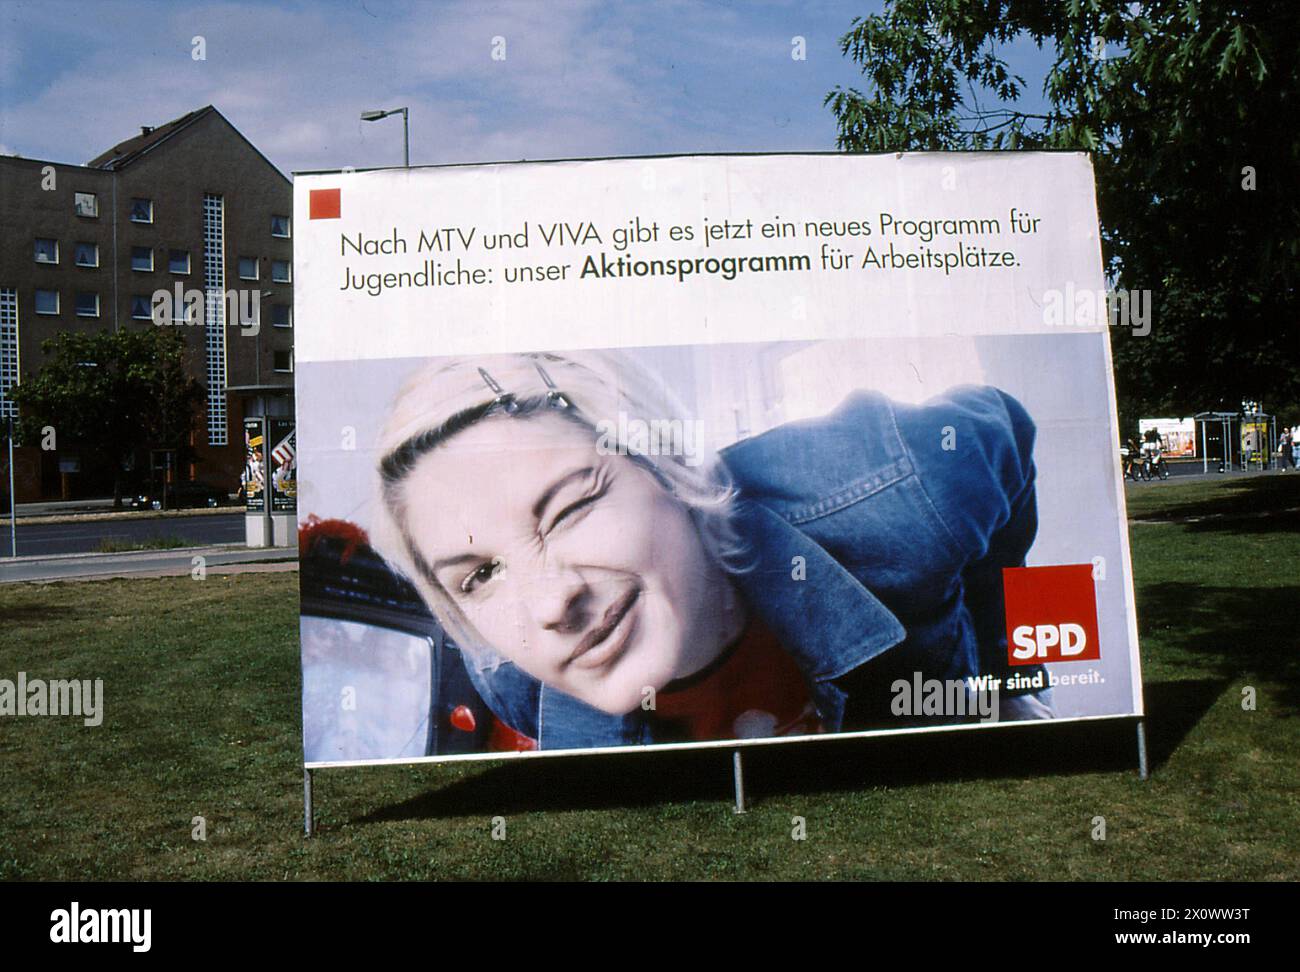 RECORD DATE NOT STATED Berlin/Brandenburg/Germany/Billboards of Helmut Josef Michael Kohl, Geerman canchellor and leader of CDU been vandelized during general eelctions compiagn in Berlain and other billbaards are SPD are fine and people infront billboard in Berlin Brad nenburg Germany Photo.Francis Joseph Dean/Dean Pictures Stock Photo